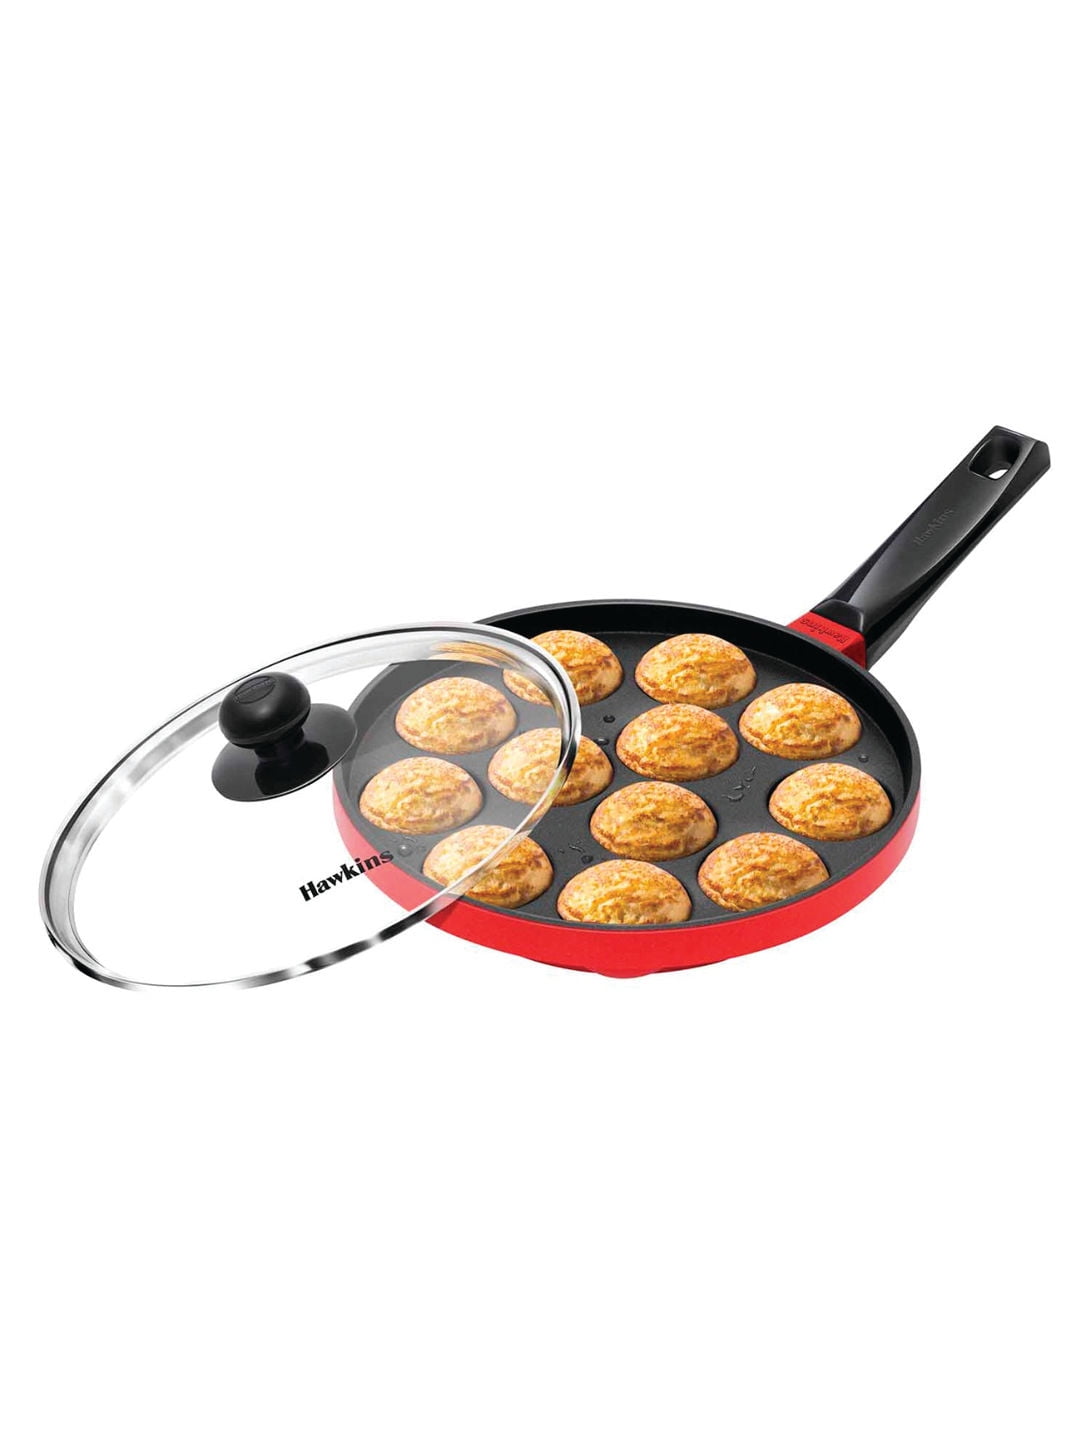 Hawkins Nonstick Appe Pan with Glass Lid, 12 Cups, 22 cm 